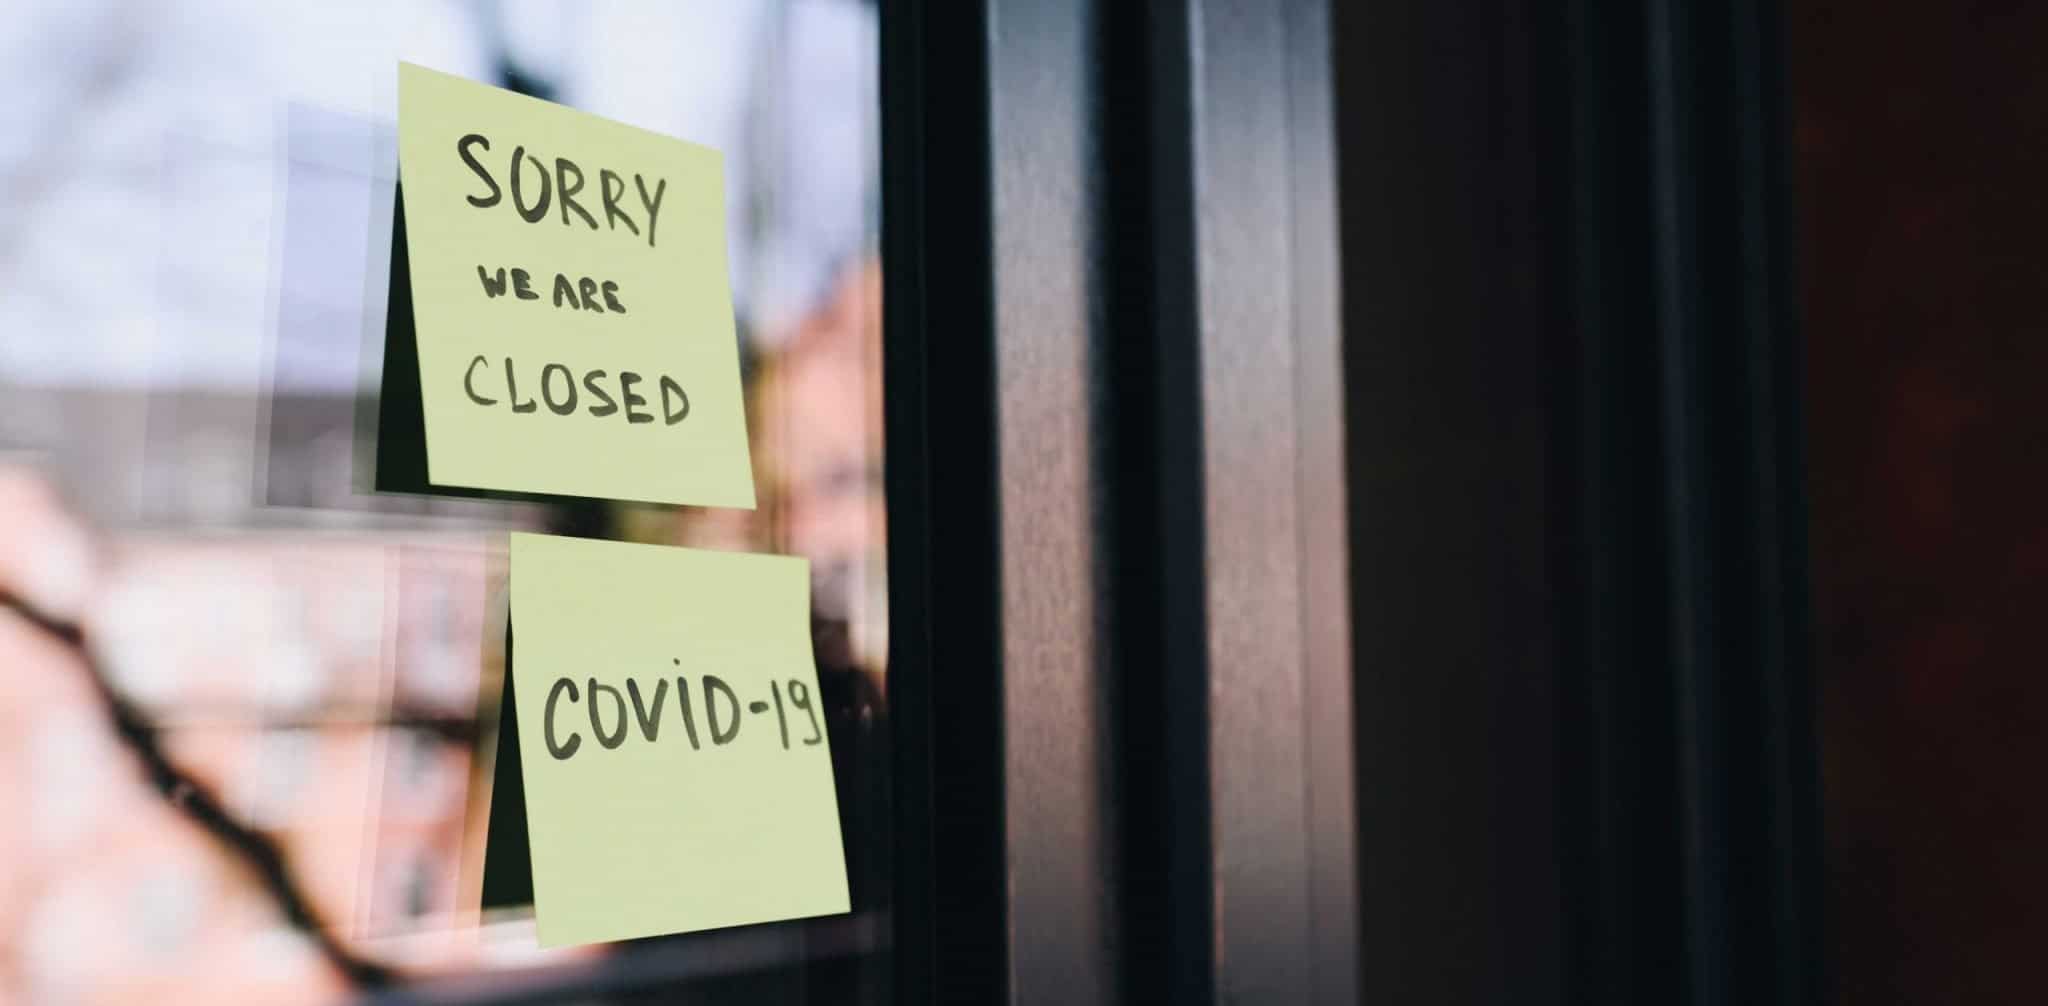 Pof a business closed due to Covid-19